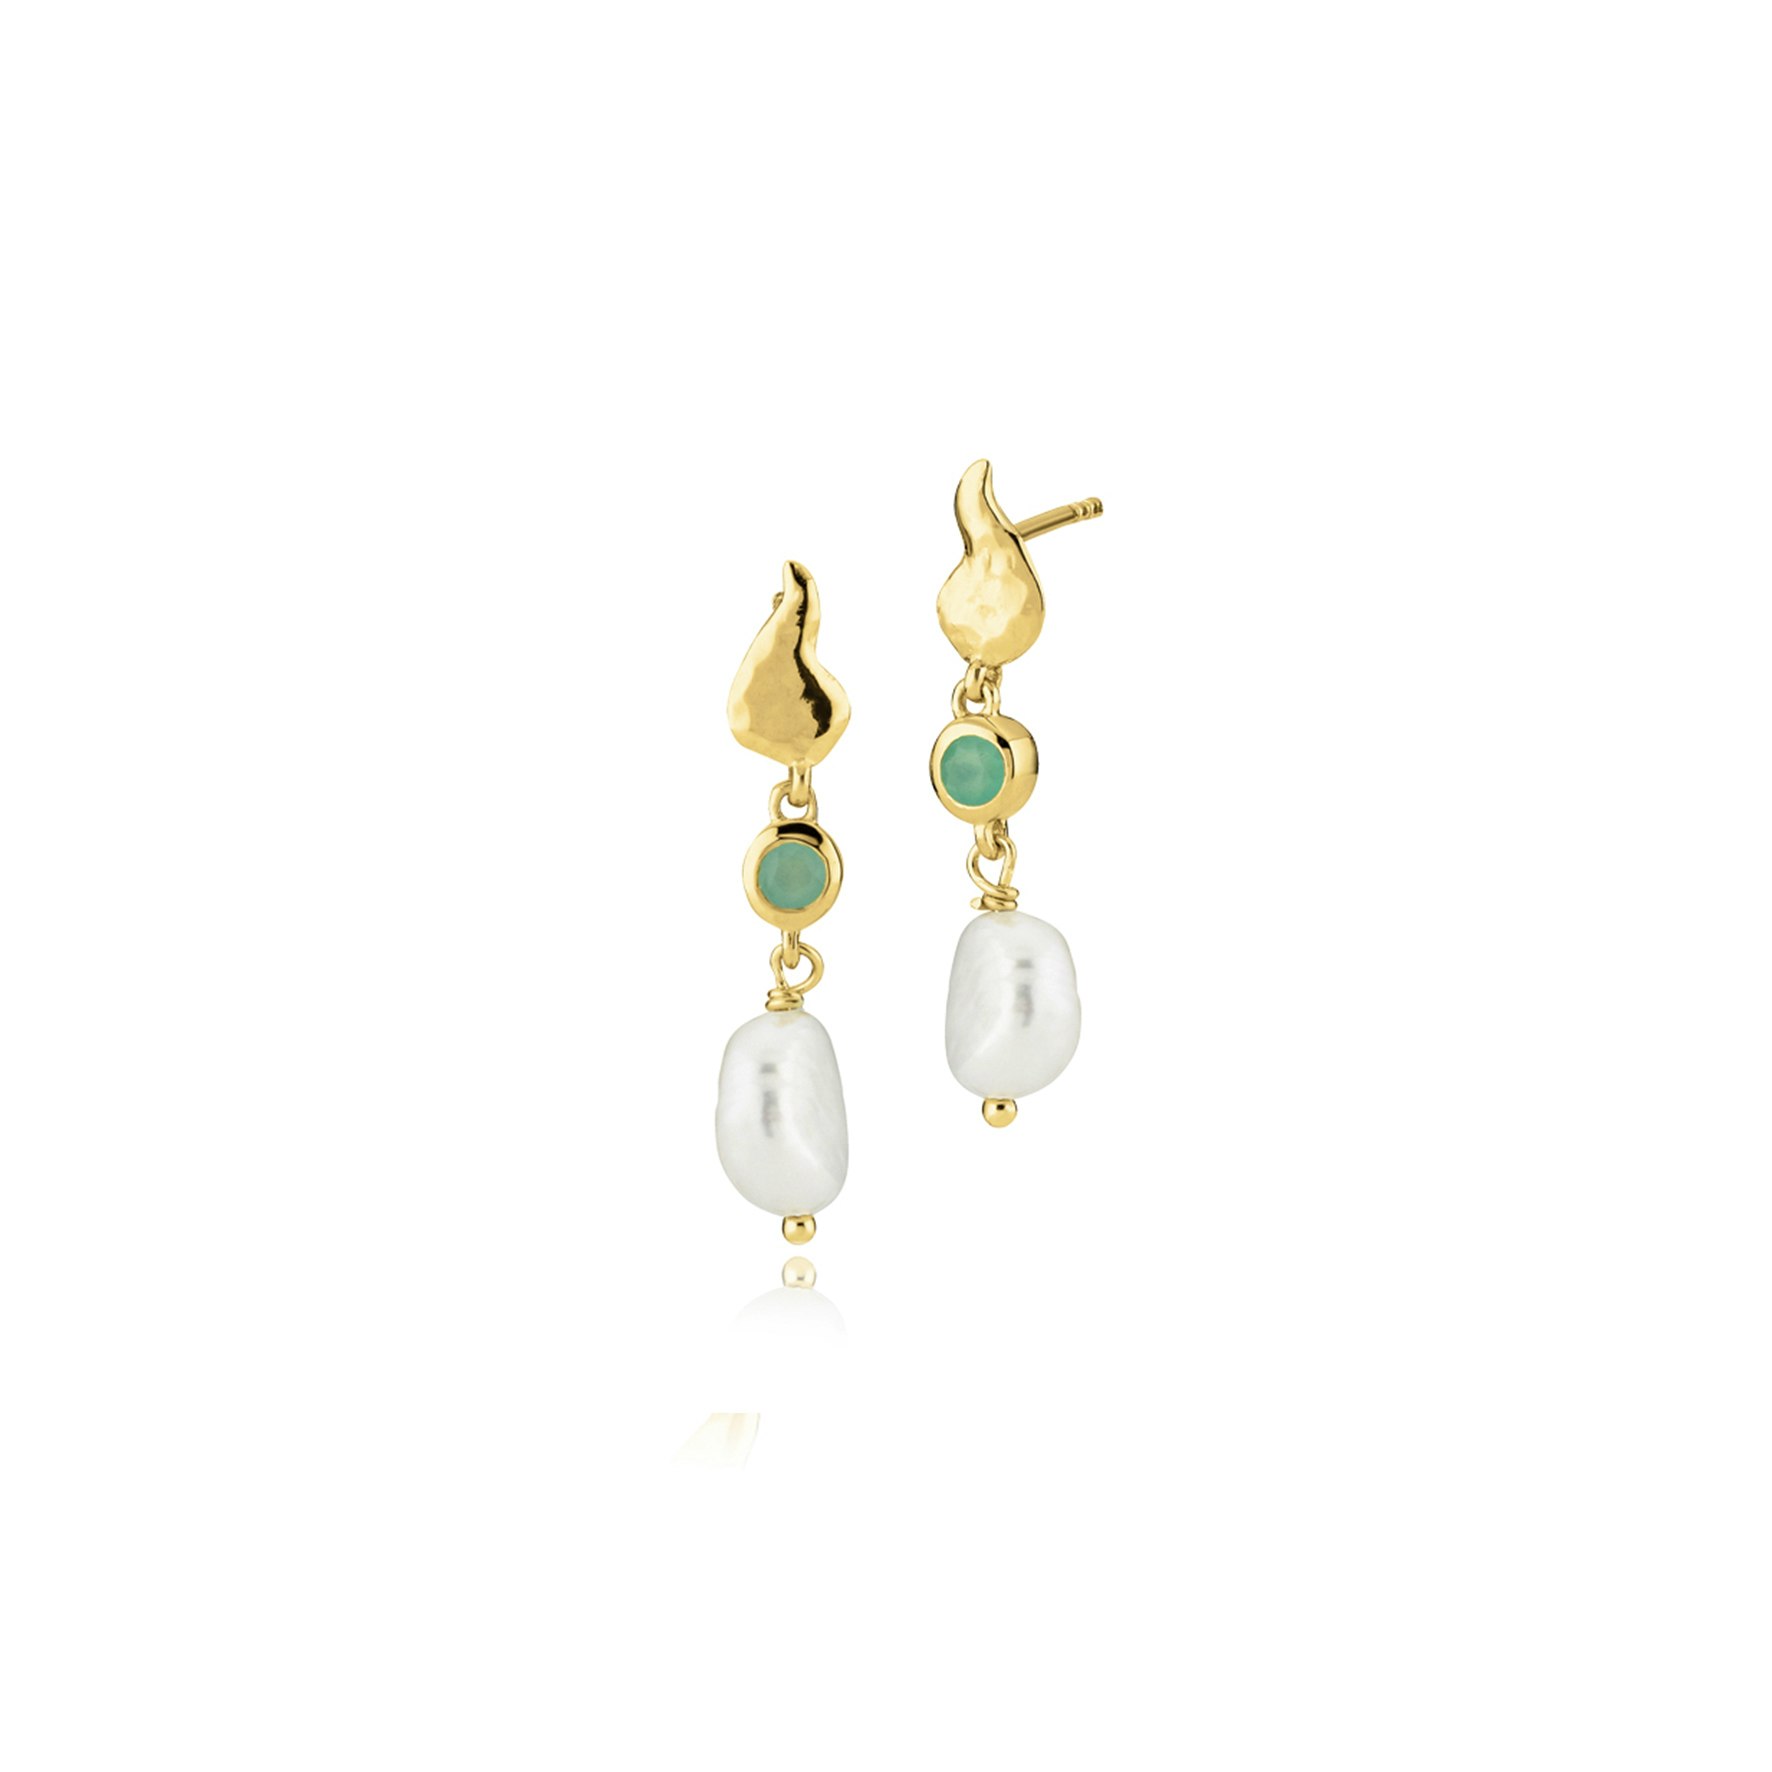 Leonora Earrings With Pearl And Green Stone von Izabel Camille in Vergoldet-Silber Sterling 925